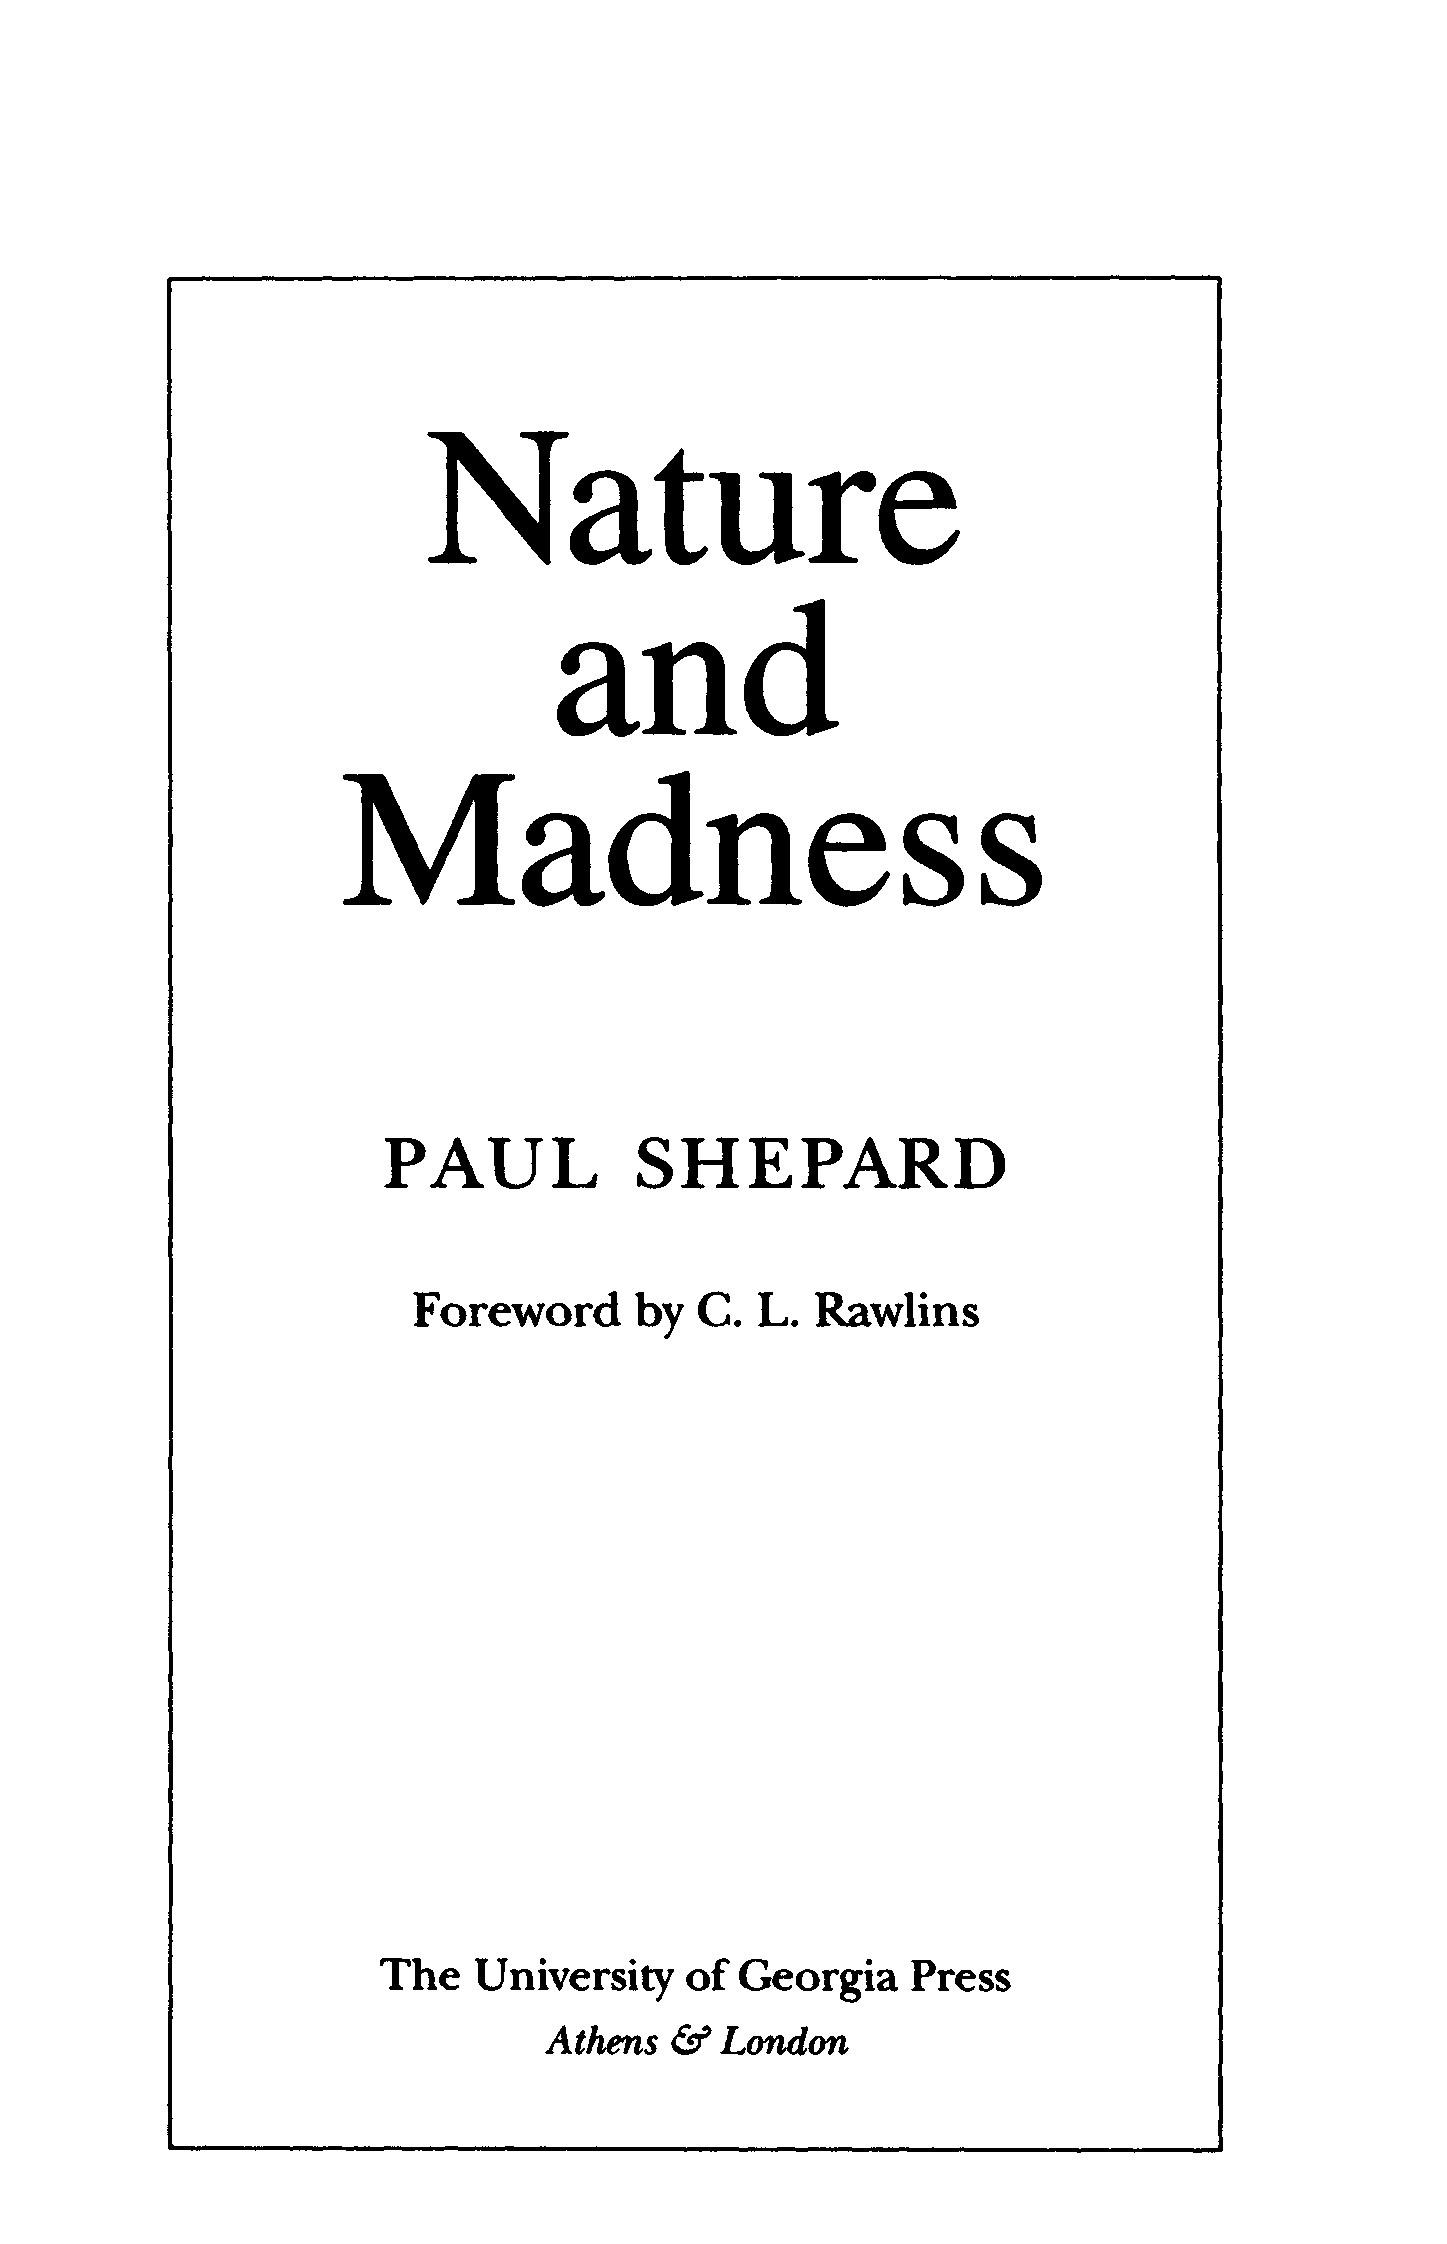 p-s-paul-shepard-nature-and-madness-book-2.jpg